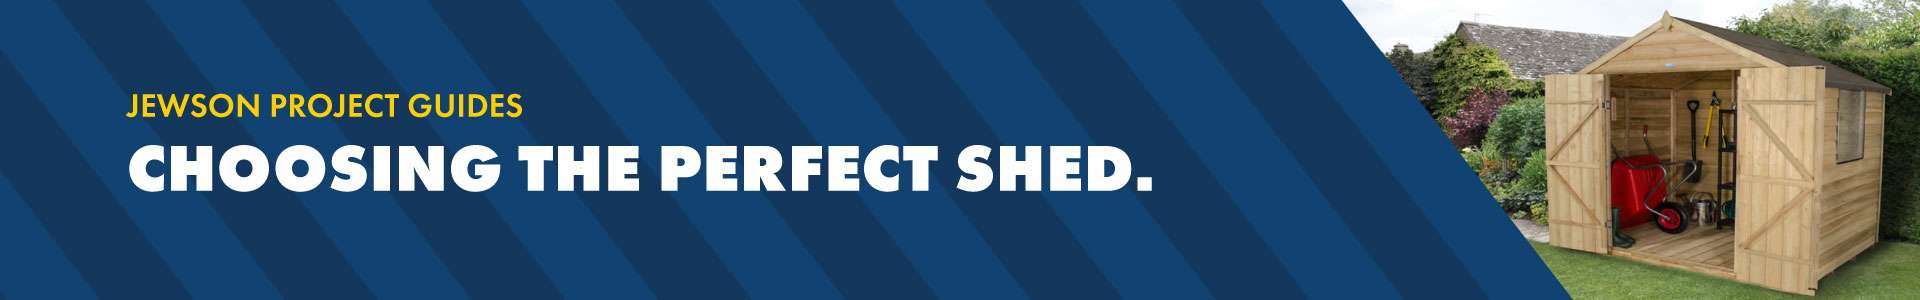 A guide to choosing the perfect shed